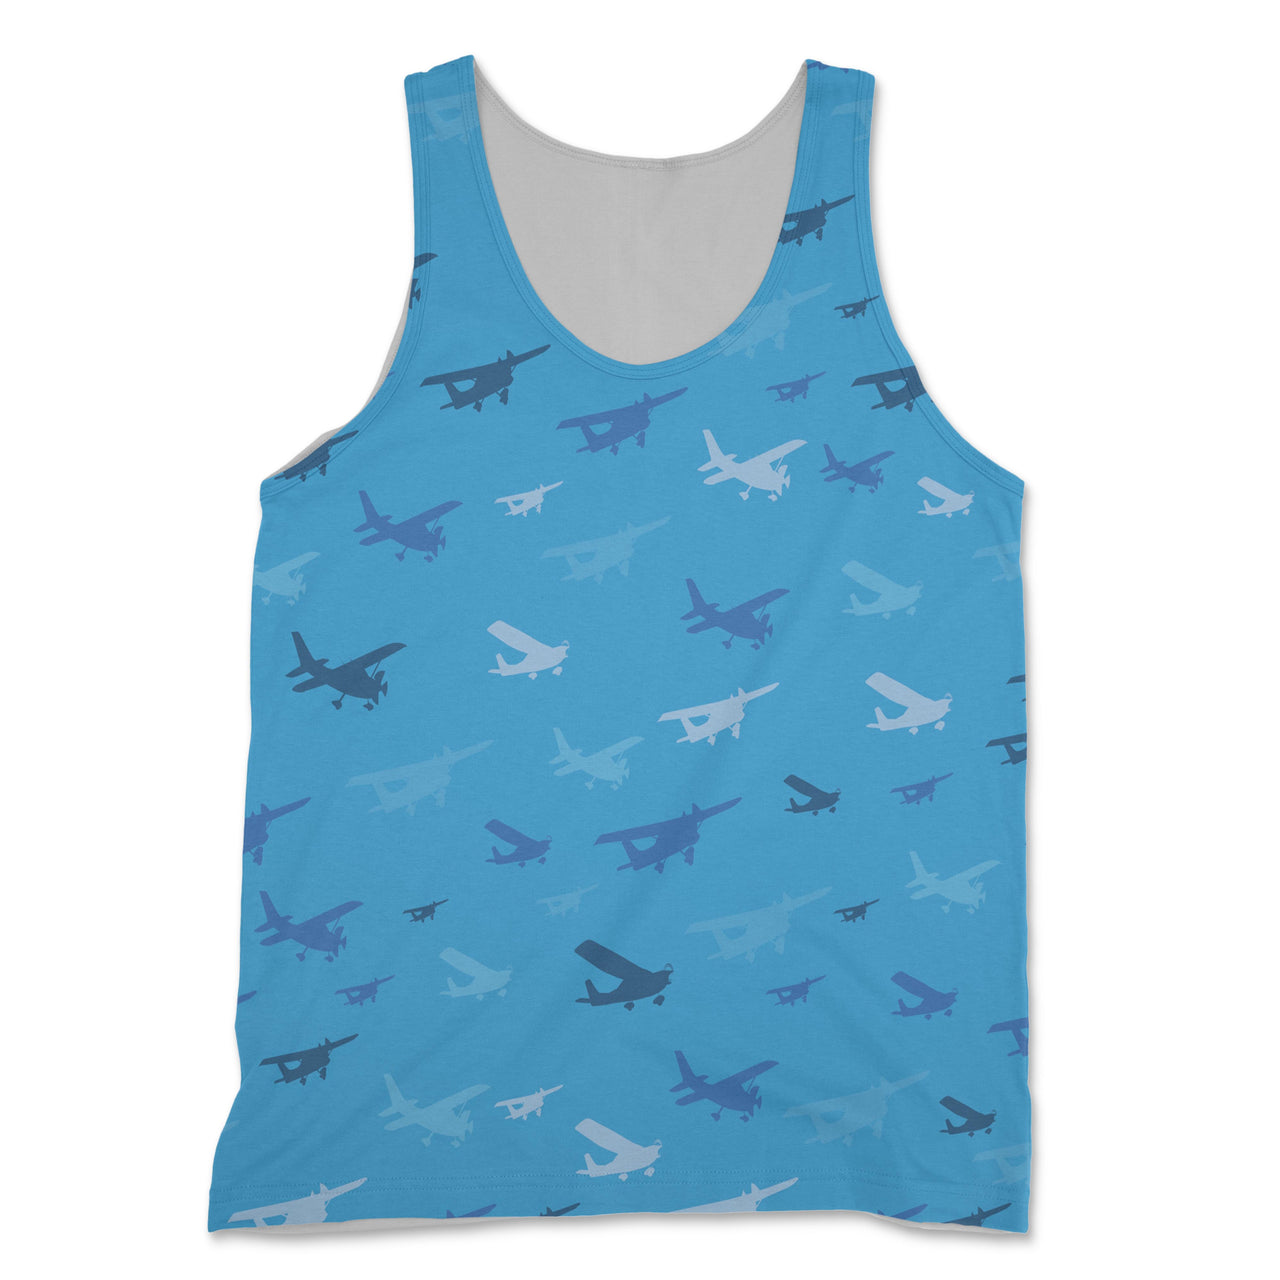 Many Propellers Designed 3D Tank Tops